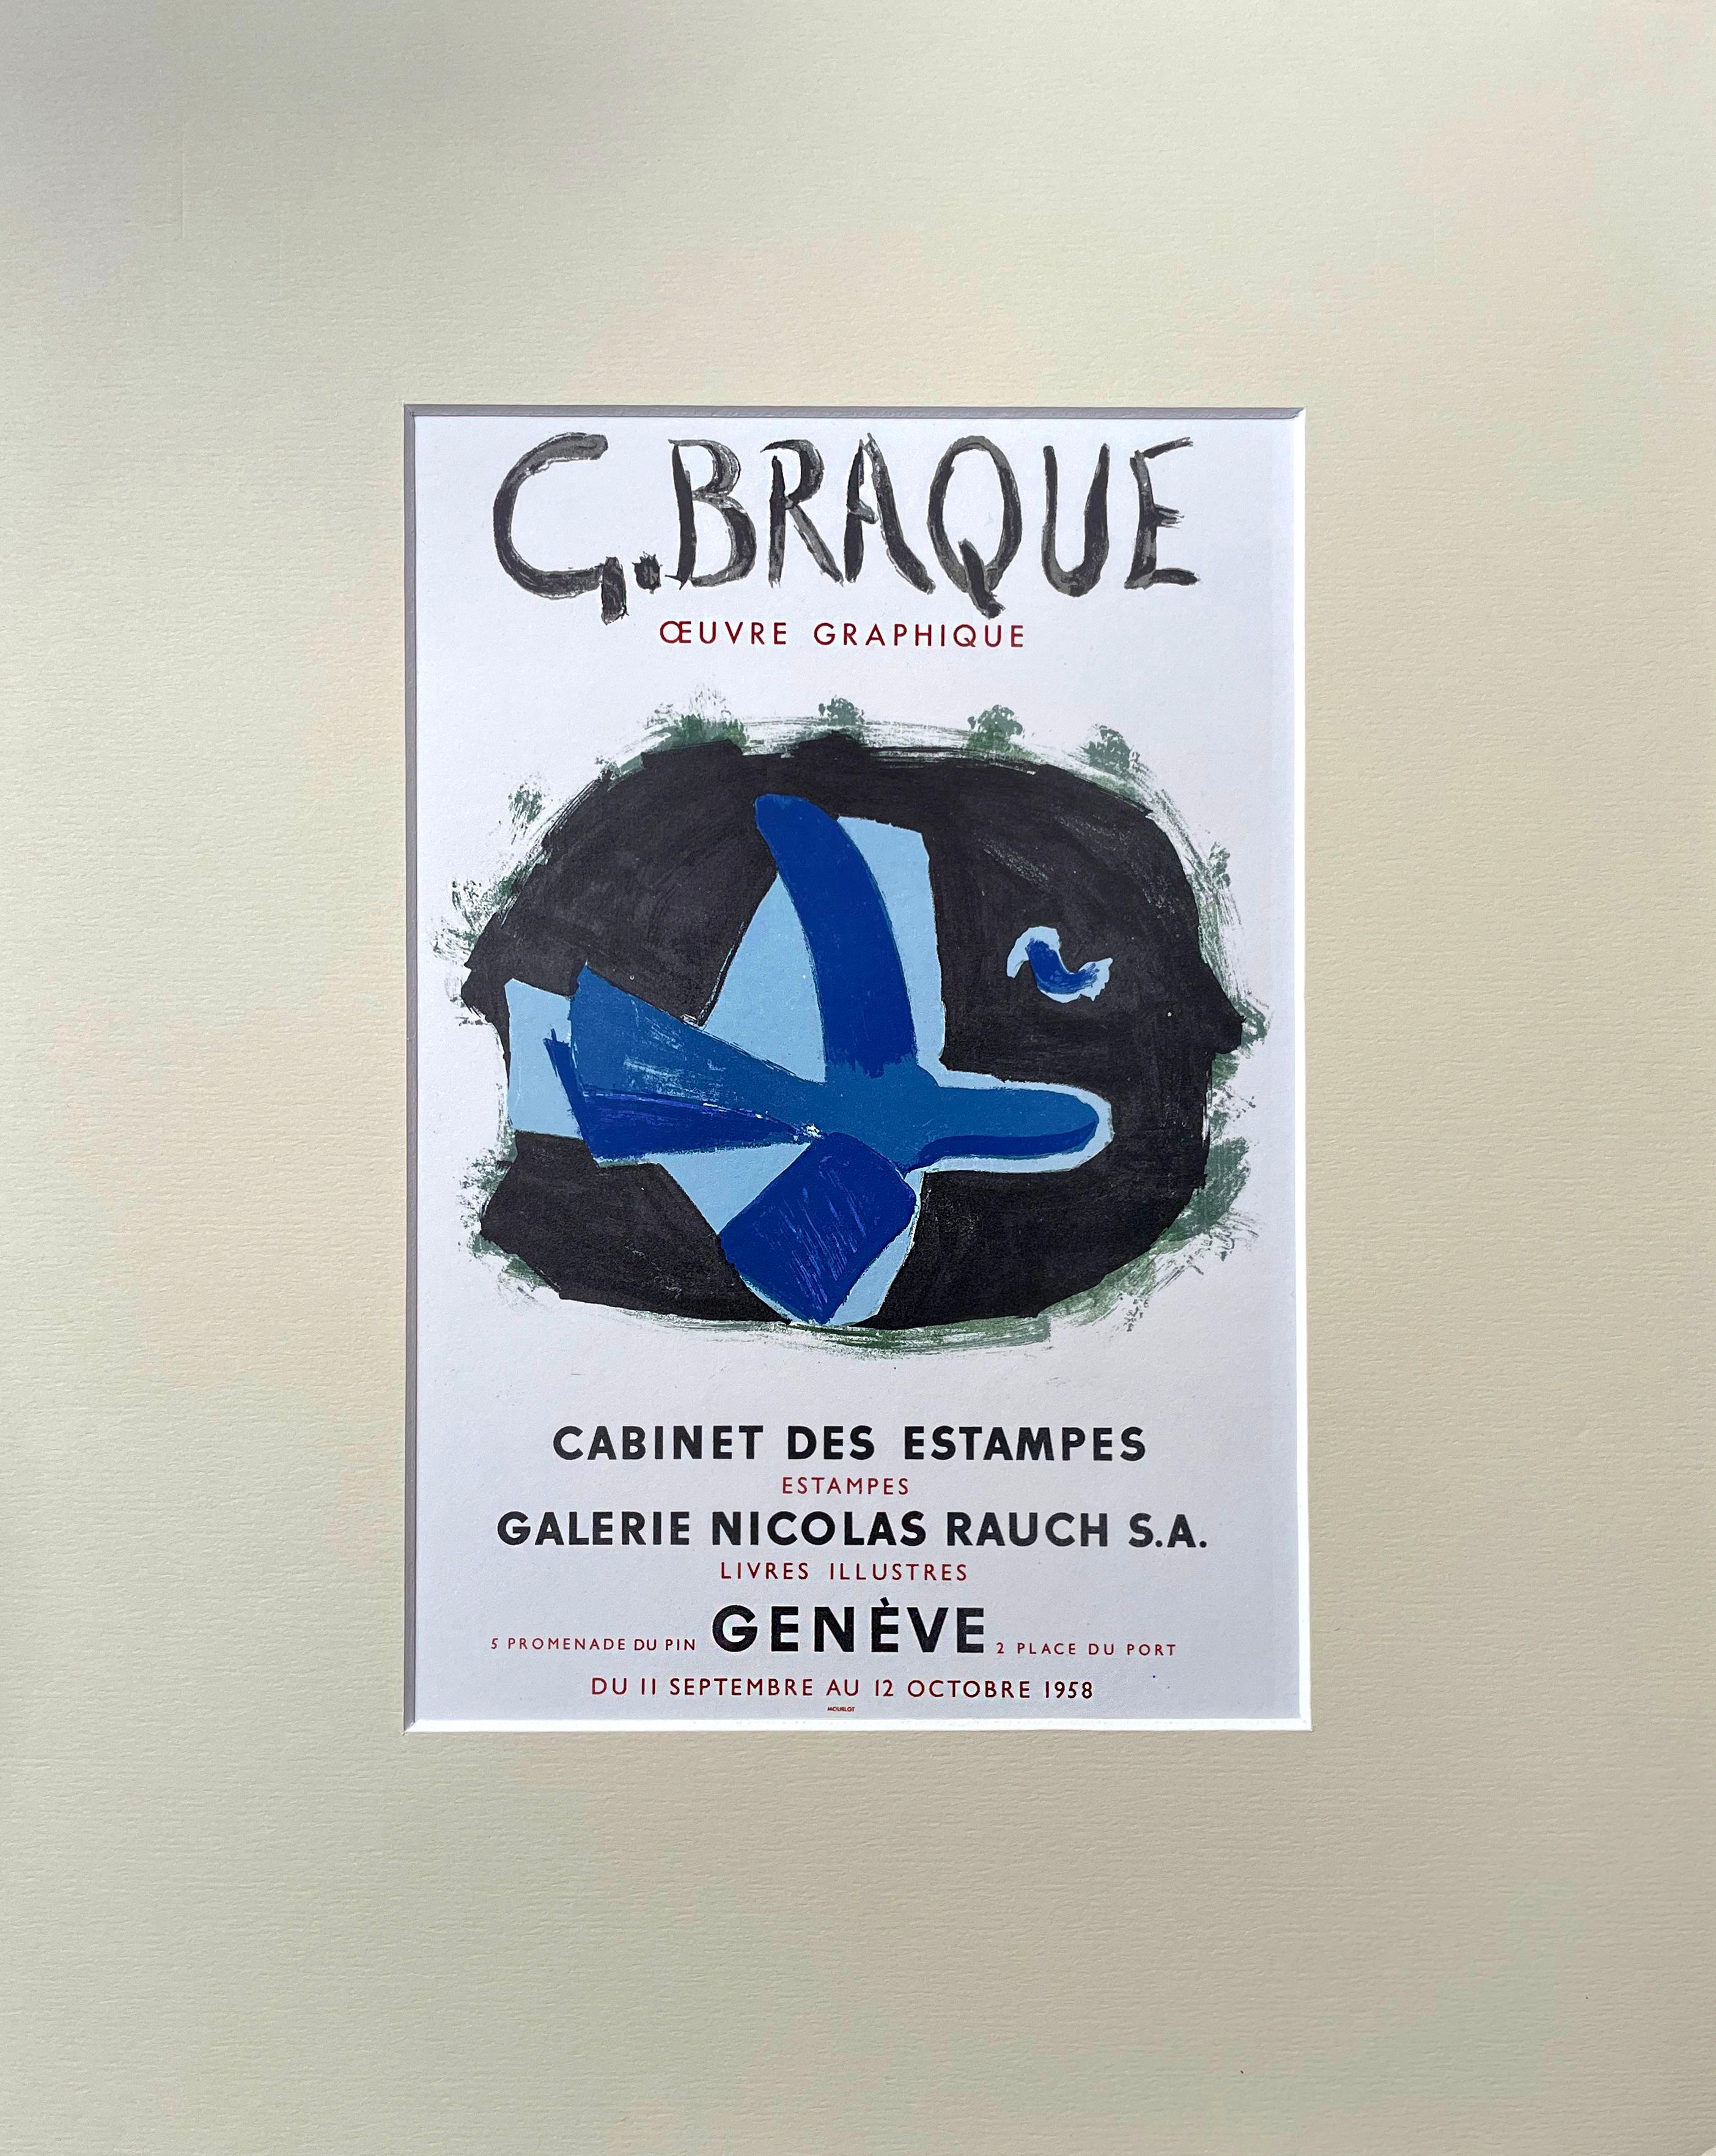 Graphic Artwork Exhibition Poster by Georges Braque, Modernist Lithograph 1959 - Cubist Print by (after) Georges Braque